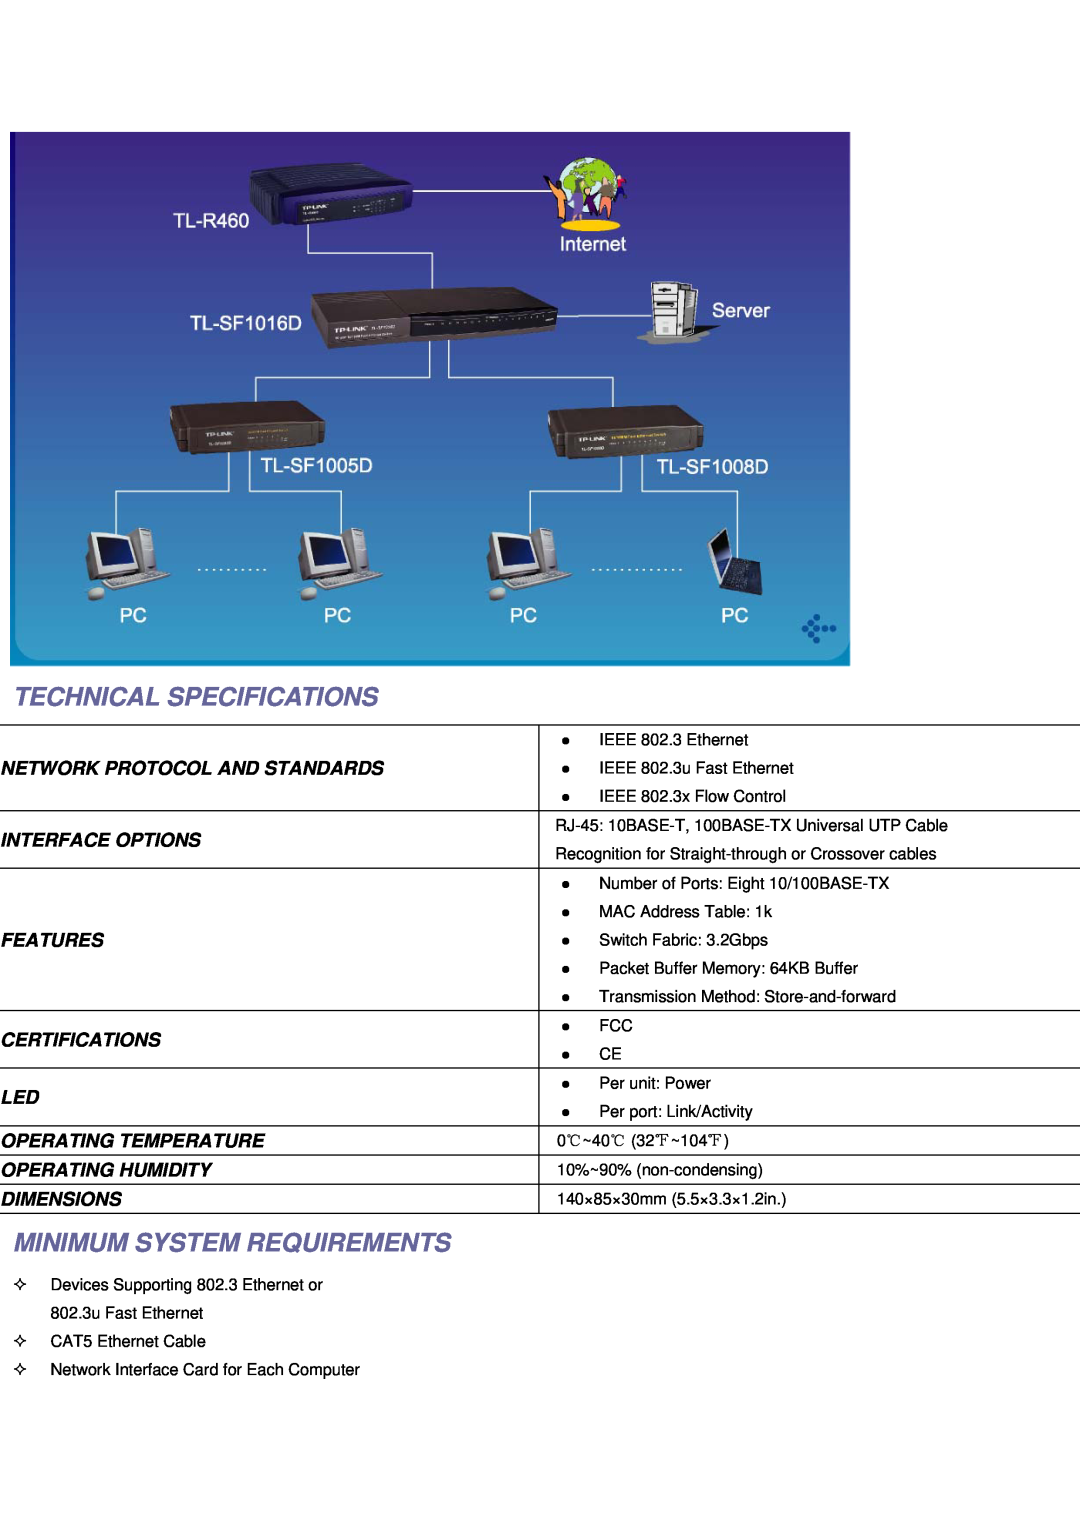 TP-Link TL-SF1016D manual Technical Specifications, Minimum System Requirements, Network Protocol And Standards, Features 